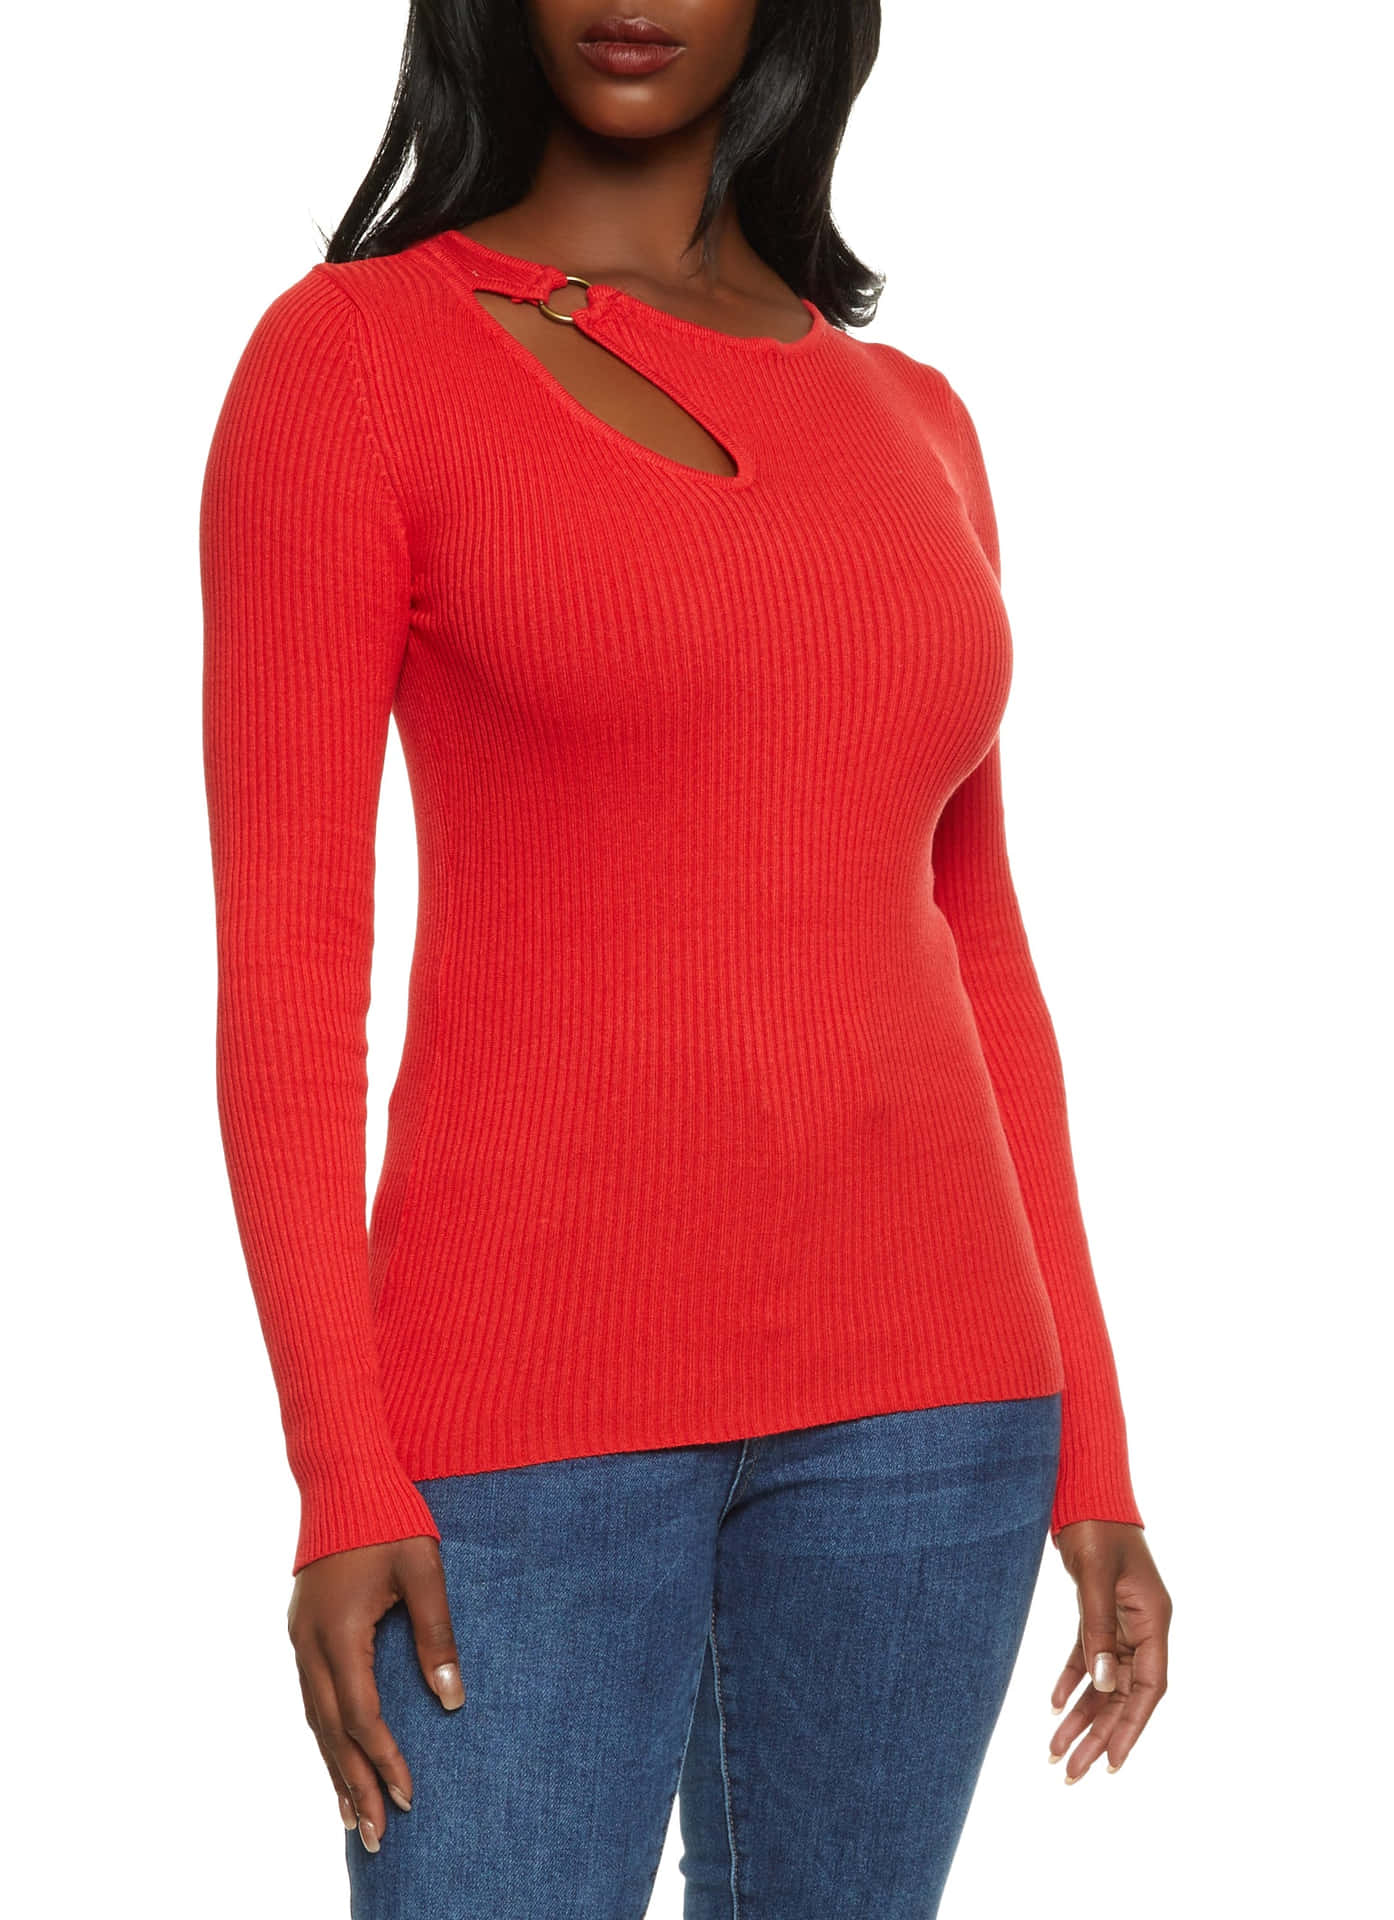 Download Woman in a stylish red sweater Wallpaper | Wallpapers.com